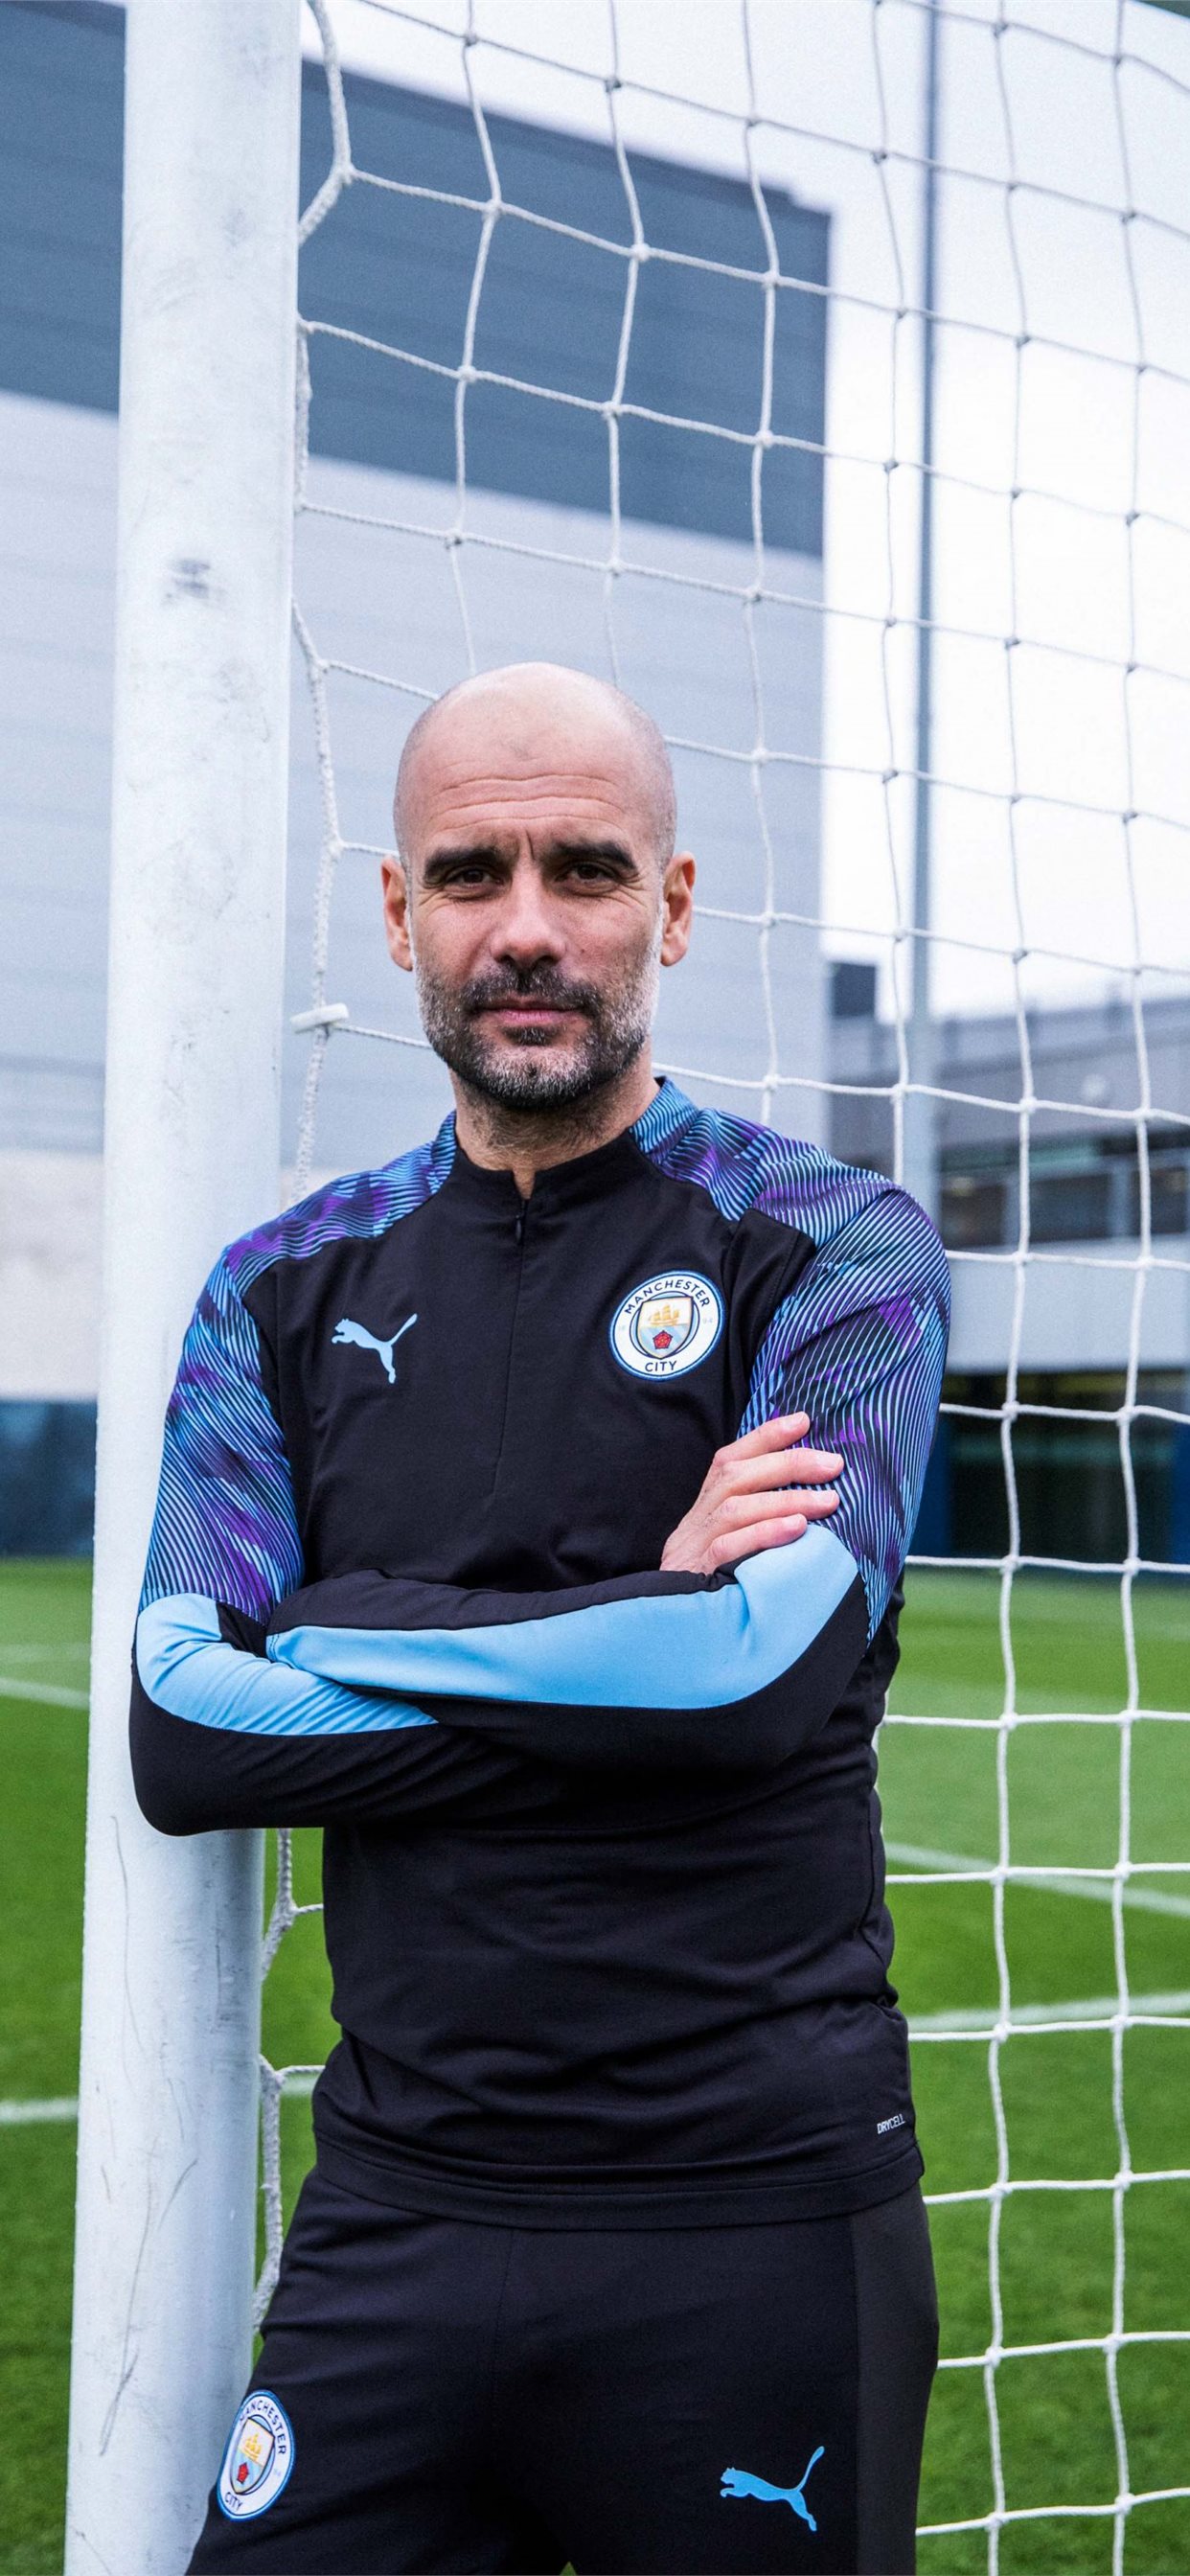 Manchester City Puma Iphone X Wallpapers Free Download